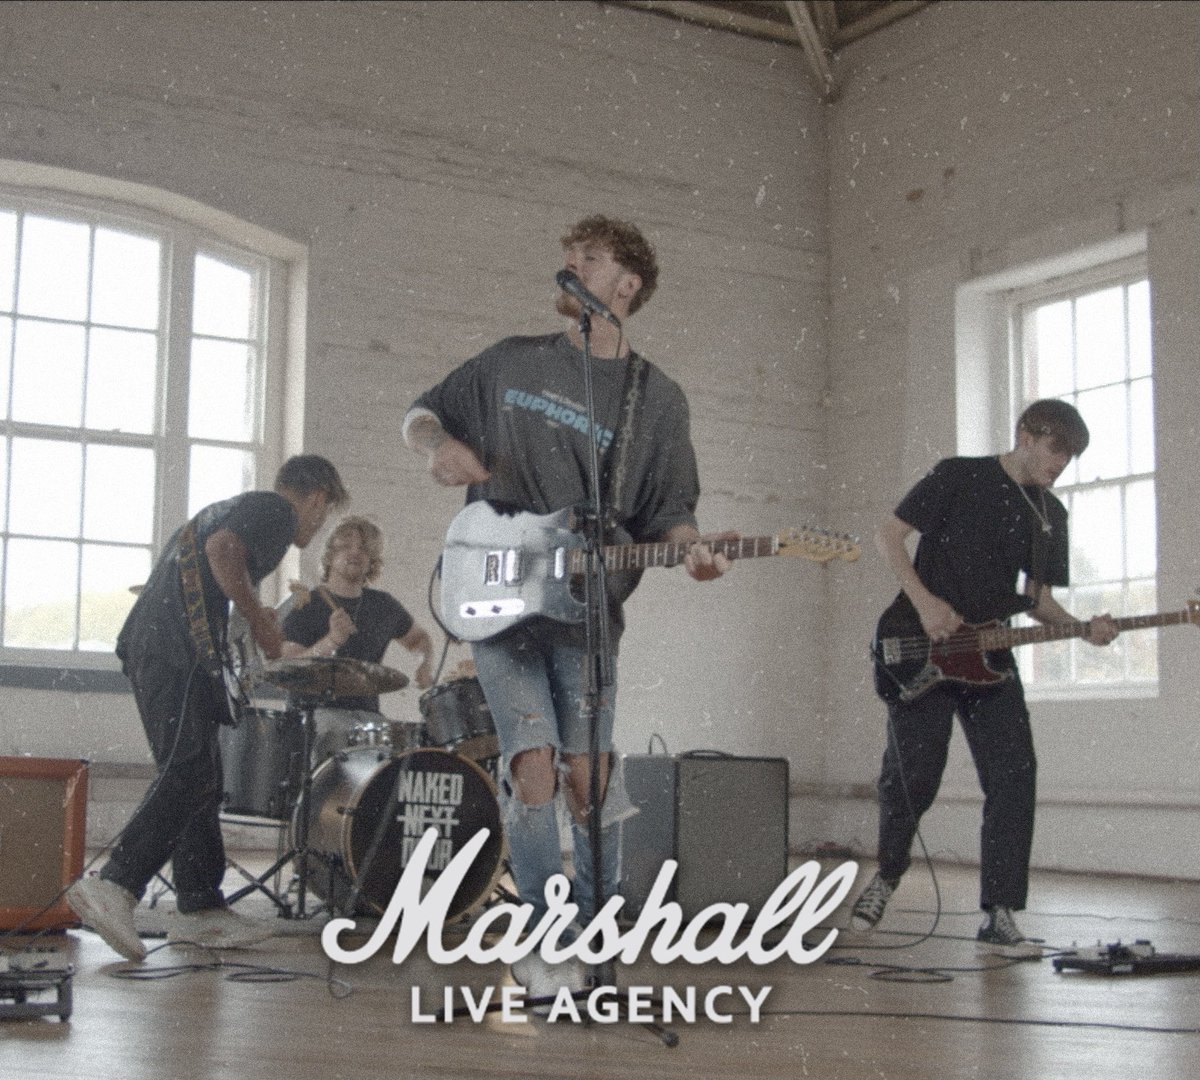 This is mental! We’re very happy to announce we’ve signed to @marshallamps_uk new live agency! Thank you for all the support so far, this is just the start. NND 🖤 x